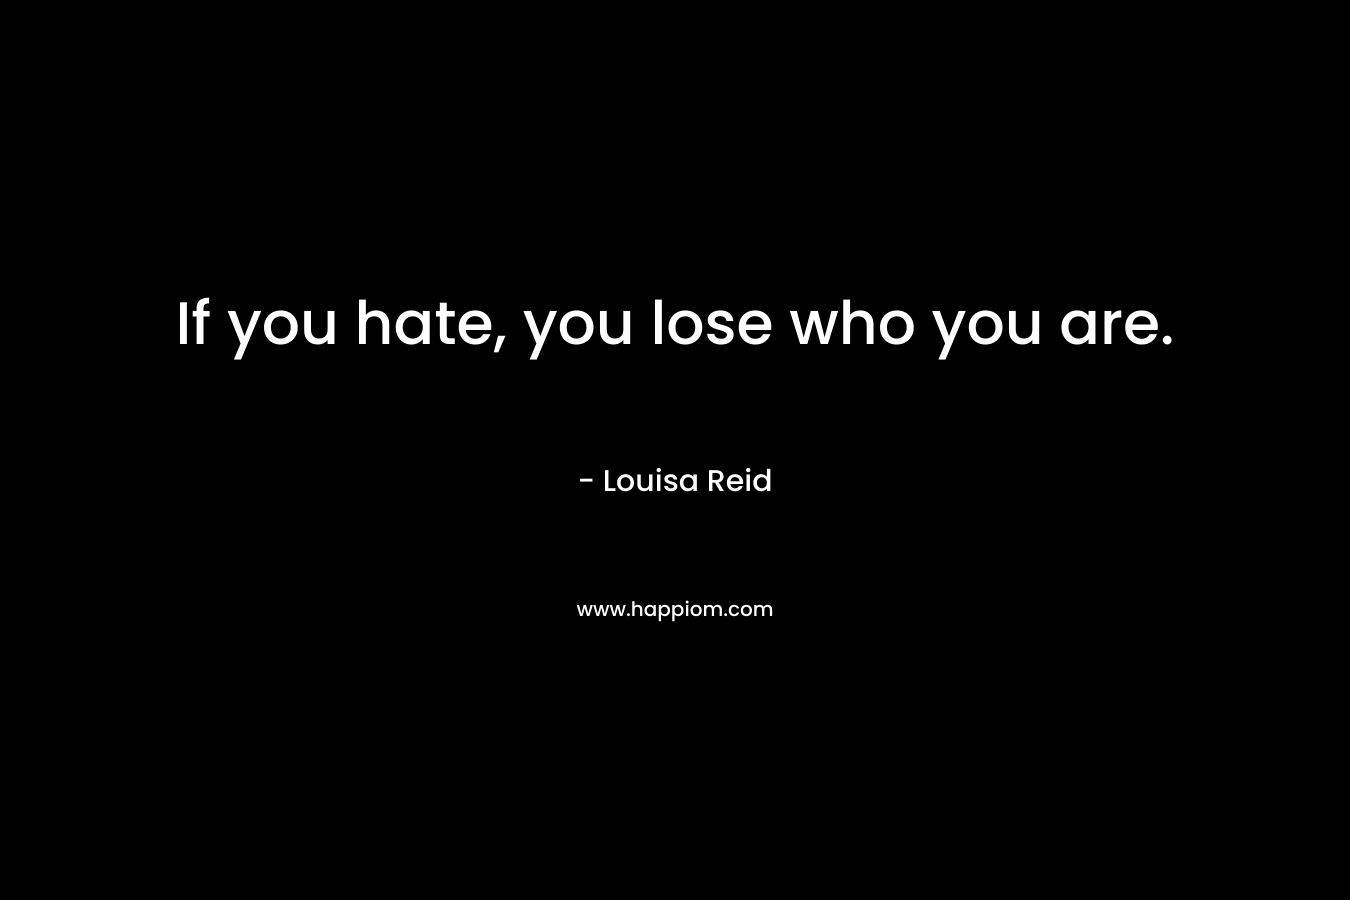 If you hate, you lose who you are.